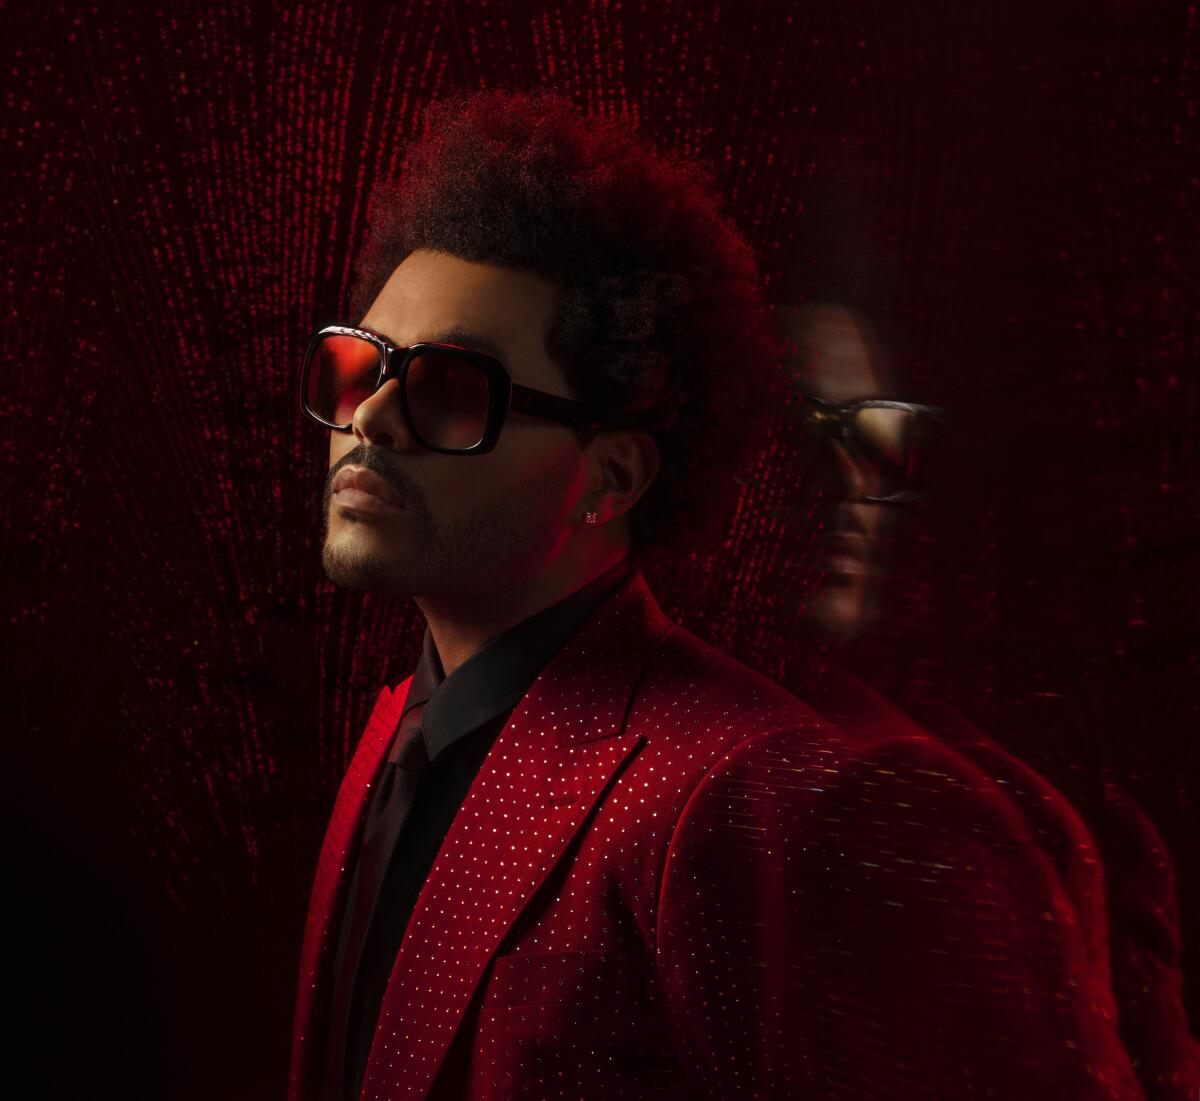 The Weeknd in a red sparkly suit leaning on a mirrored wall